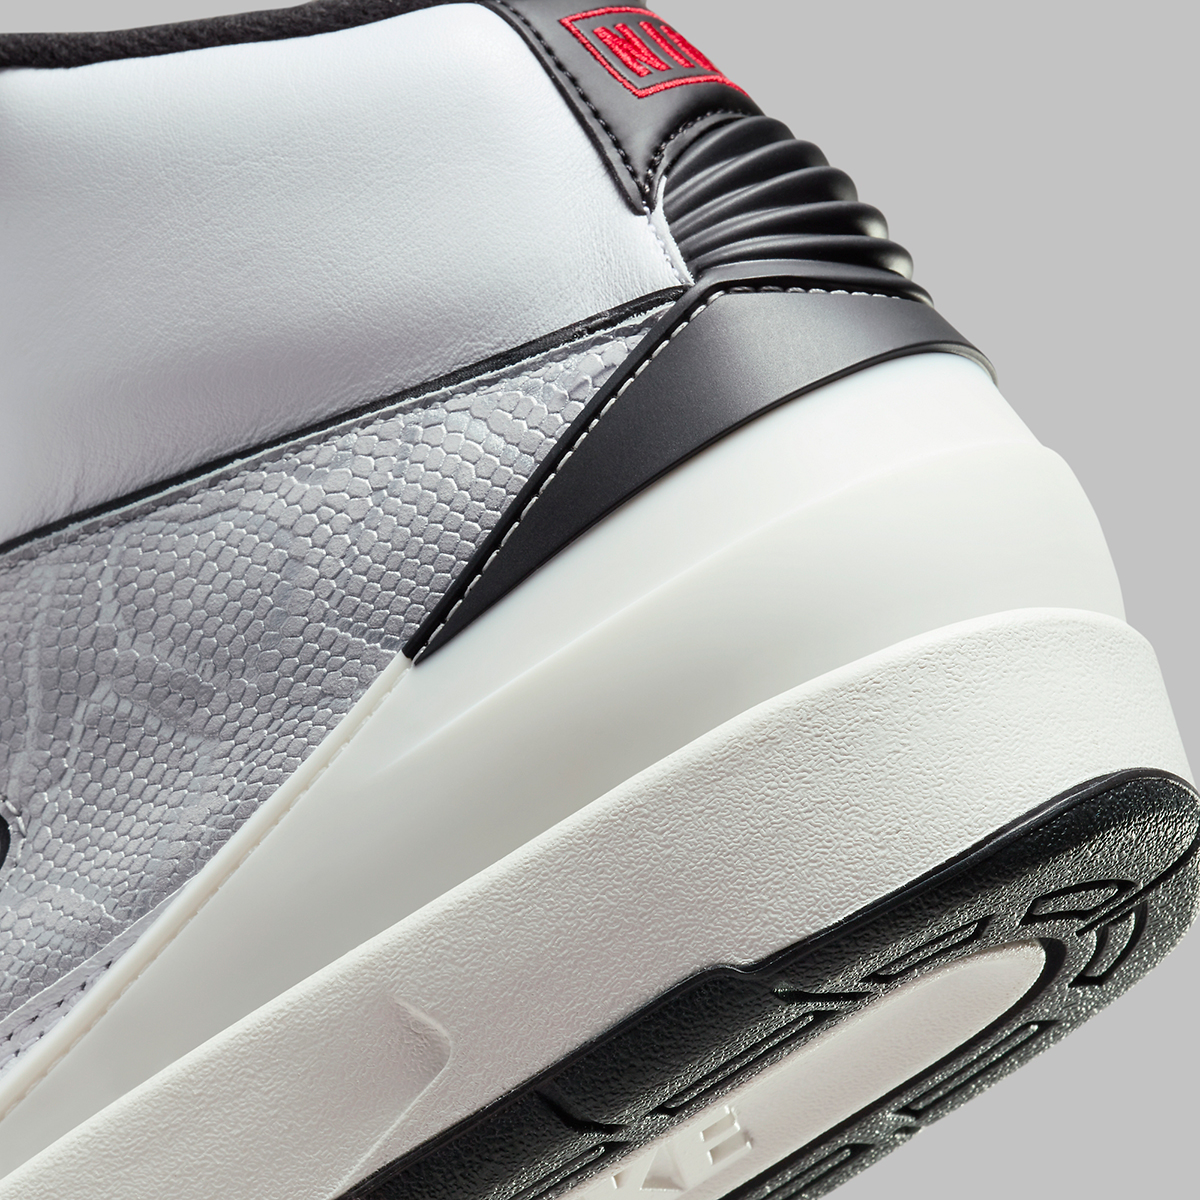 Keep It Refined With the Air Jordan 1 Baseminded Golf "Wolf Grey"